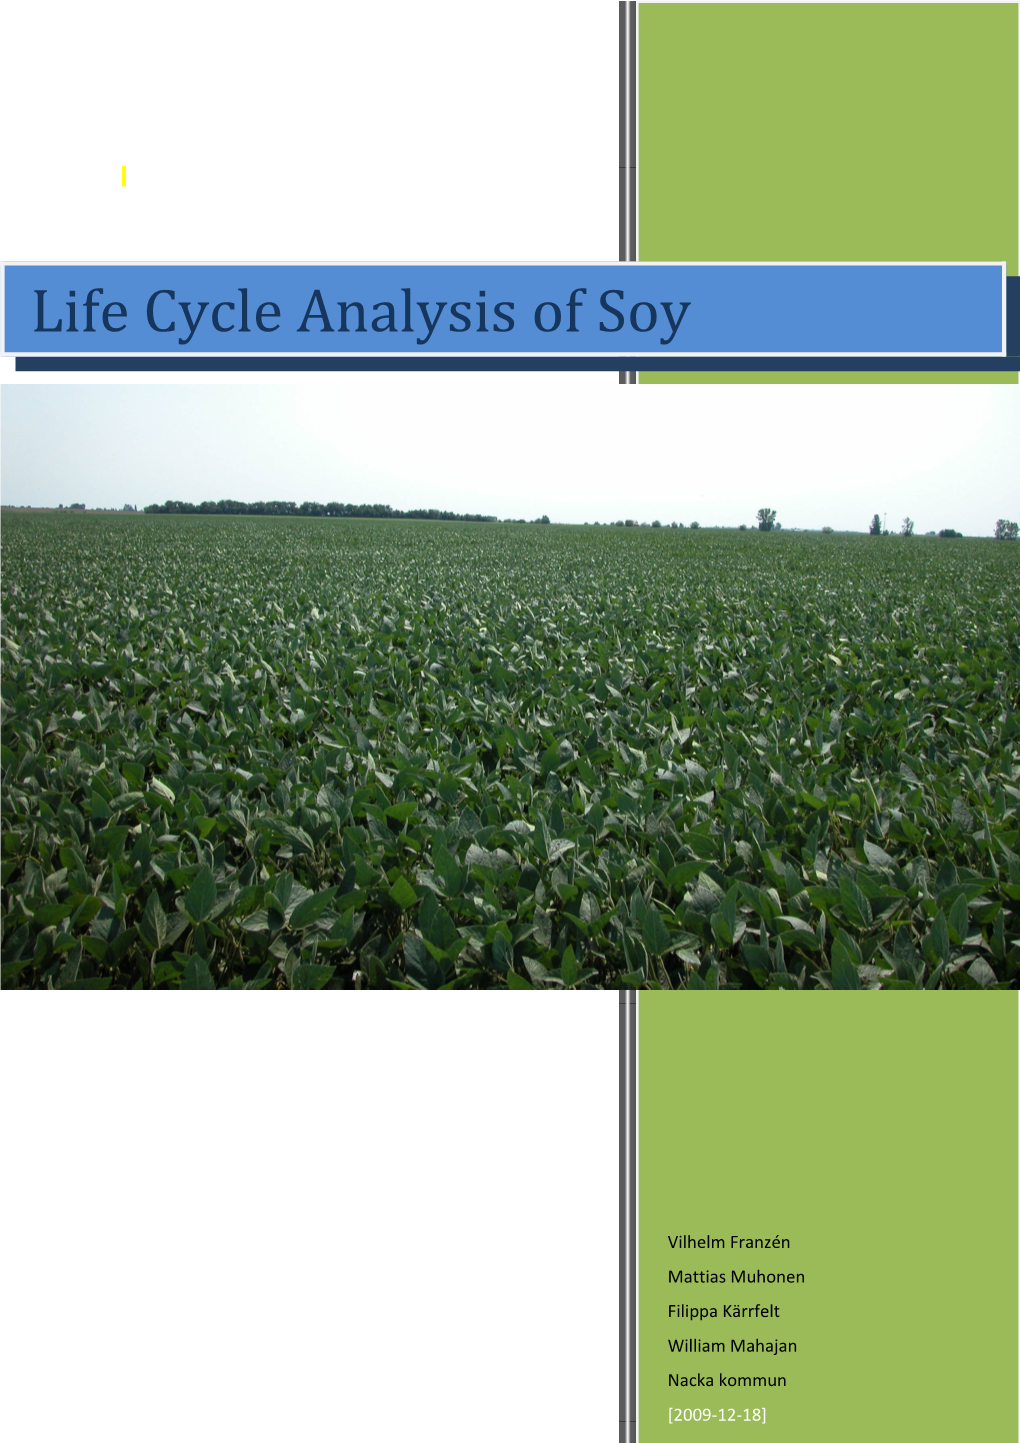 How Does the Life Cycle of Soy Affect the Environment?